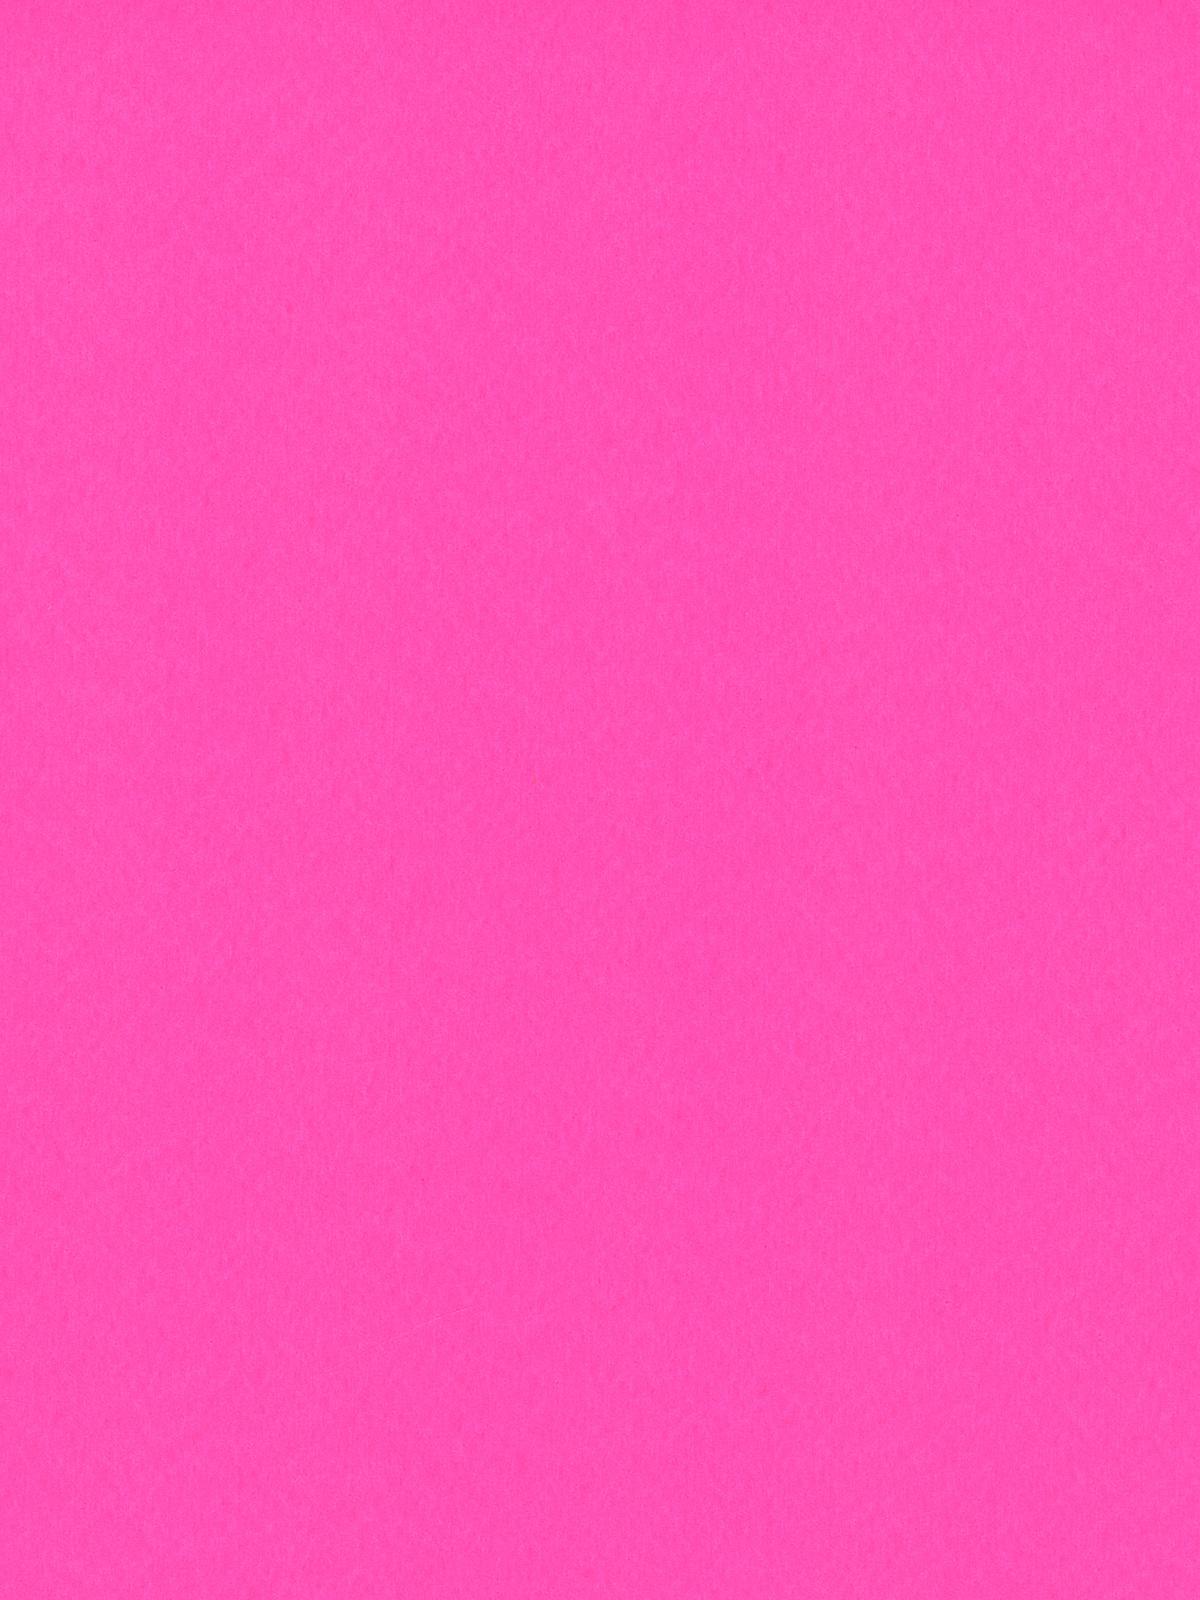 Neon Poster Board Pink